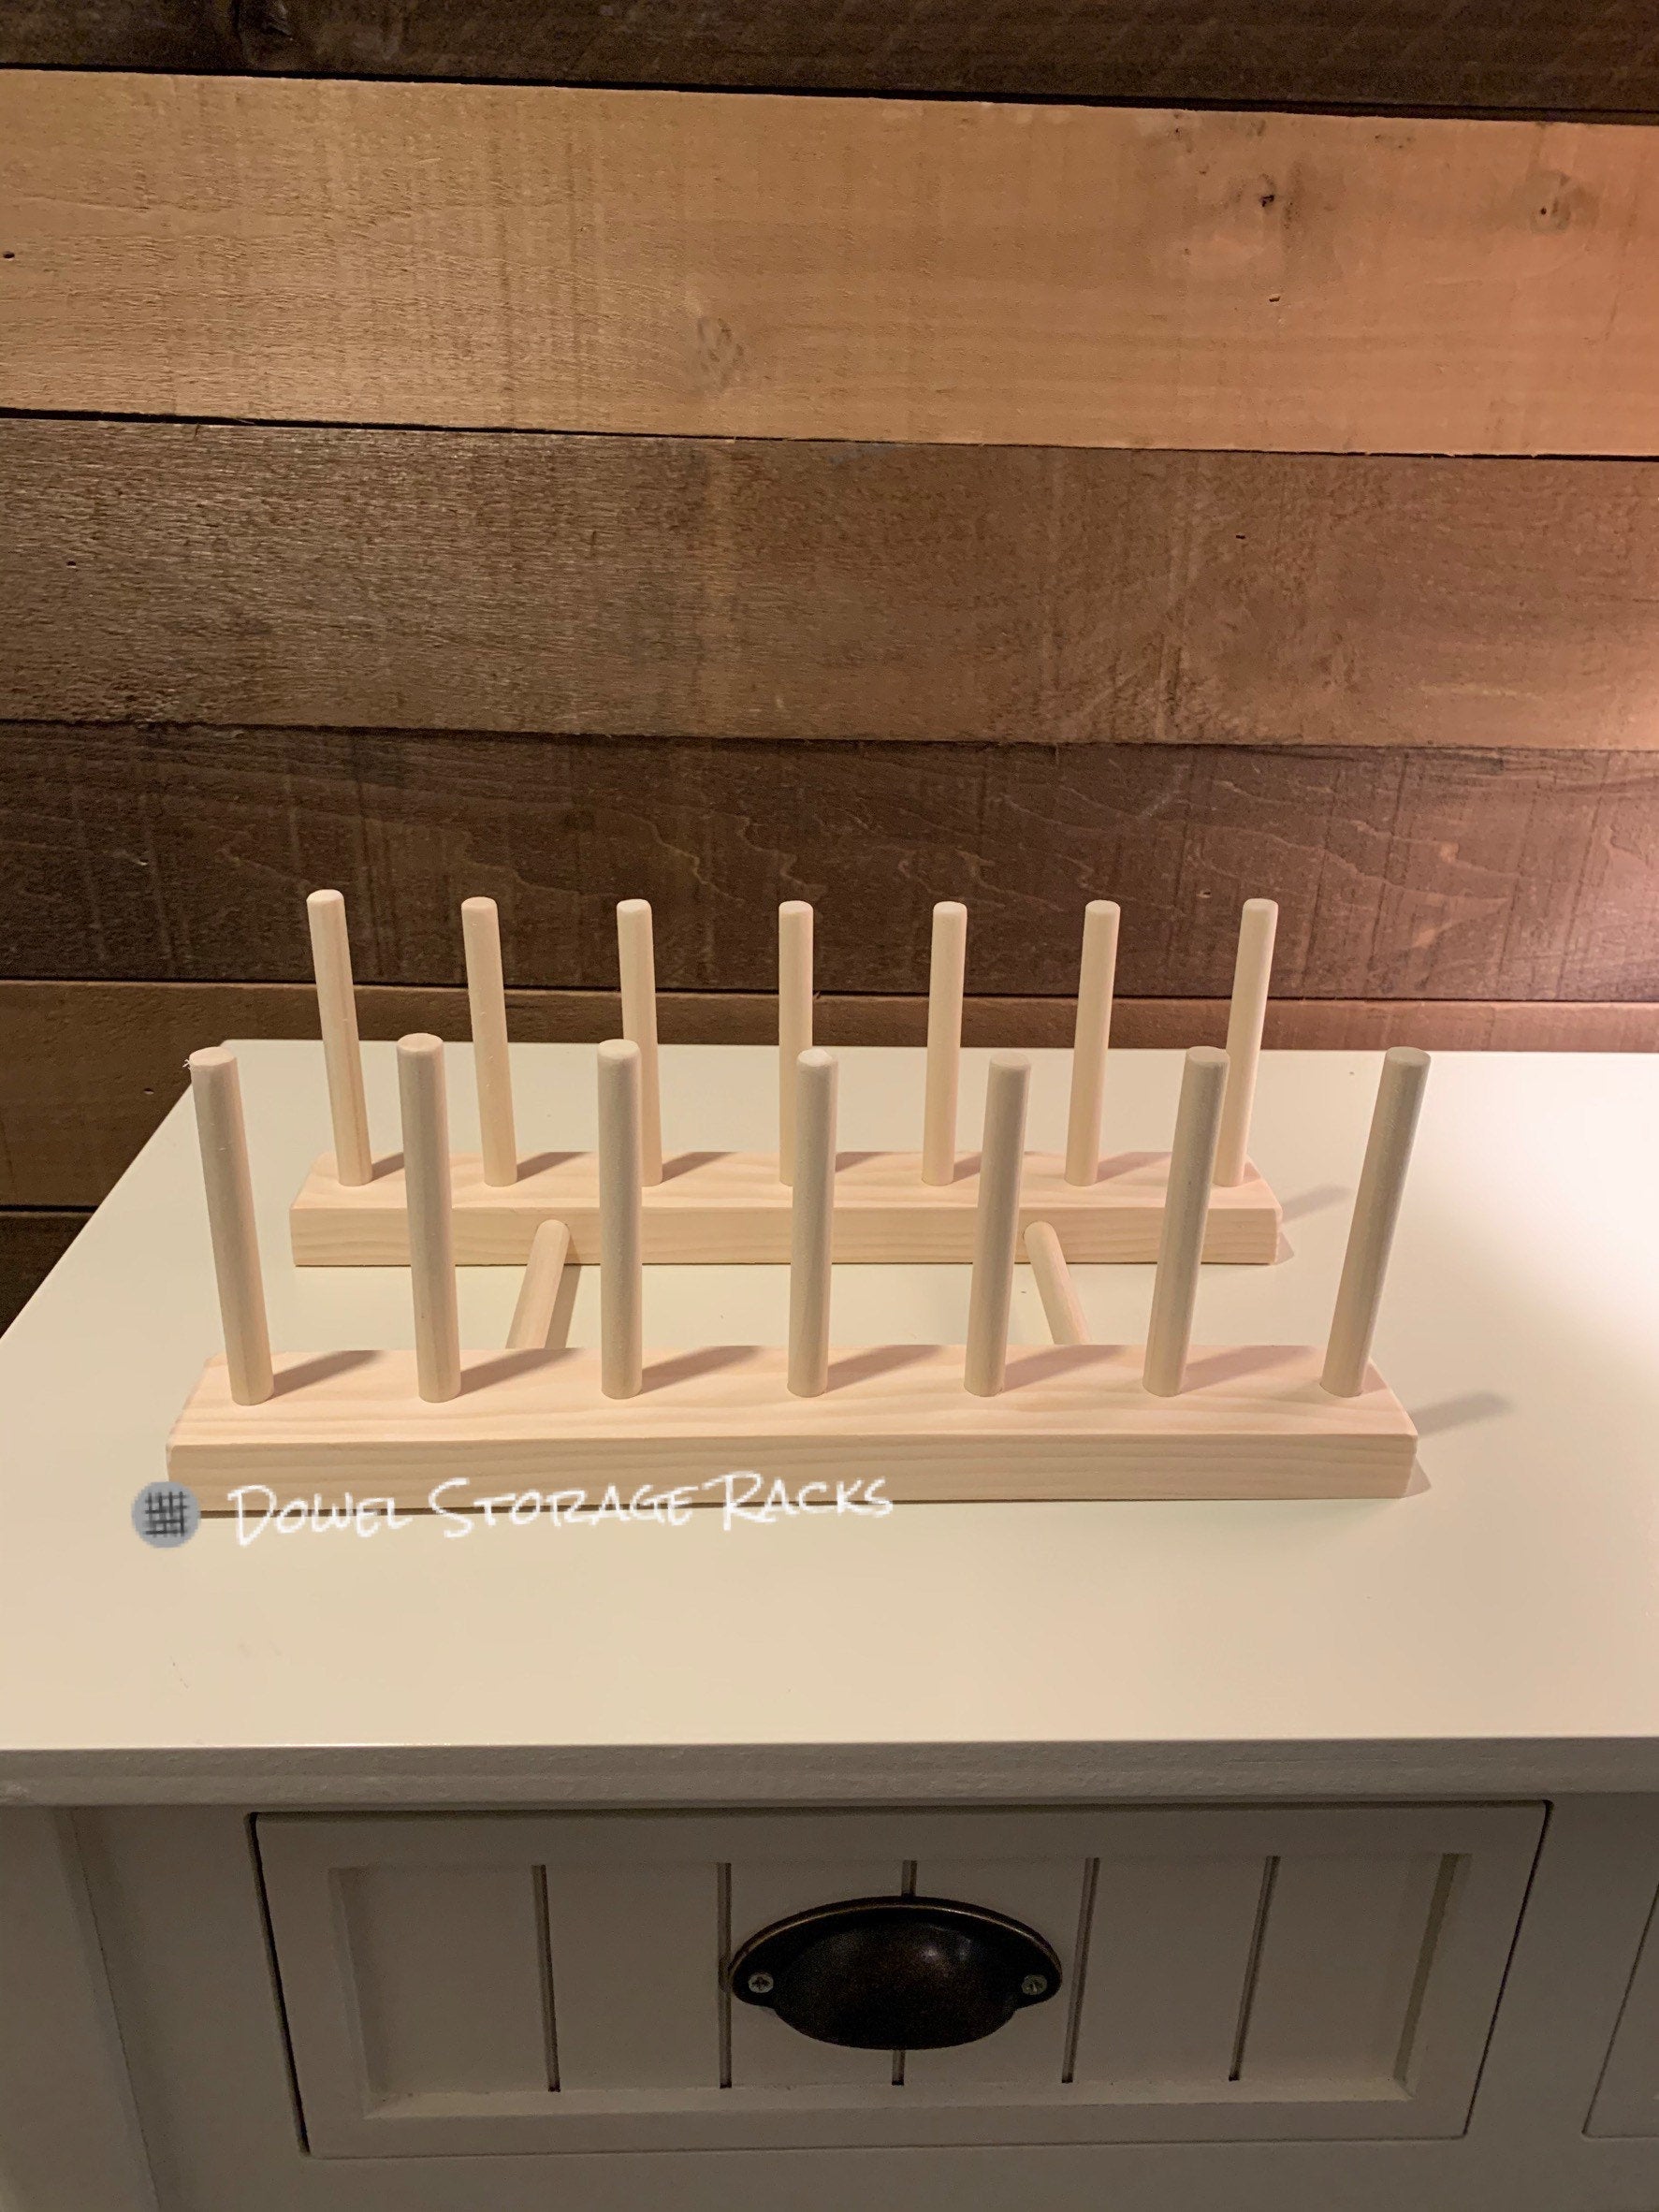 Small Wooden Dowel Storage Rack - 9.75” long by 10” wide with 12